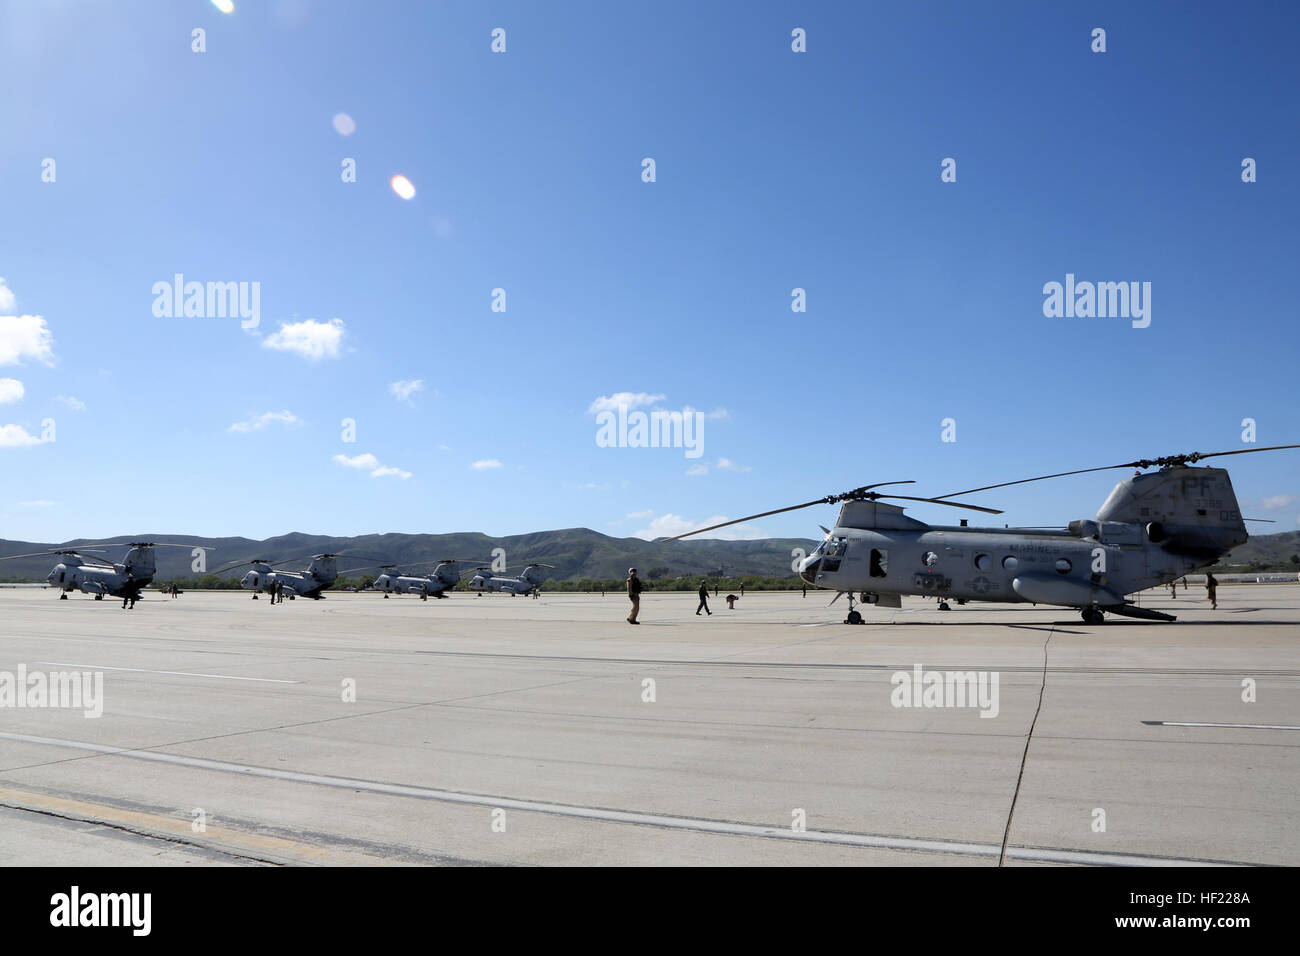 U.S. Marines with Marine Medium Helicopter Squadron (HMM) 364, Marine Aircraft Group 39, 3rd Marine Aircraft Wing (MAW), land CH-46E Sea Knight helicopters at Camp Pendleton, Calif., March 31, 2014. After 47 years of flying the CH-46, HMM-364, “Flies the Barn”, taking off and landing in unison and flying in mass formations, signifying the transition to the MV-22 Osprey. (U.S. Marine Corps photo by Sgt. Keonaona C. Paulo, 3rd MAW Combat Camera/Released) Purple Foxes 'Fly the Barn' 140331-M-EF955-151 Stock Photo